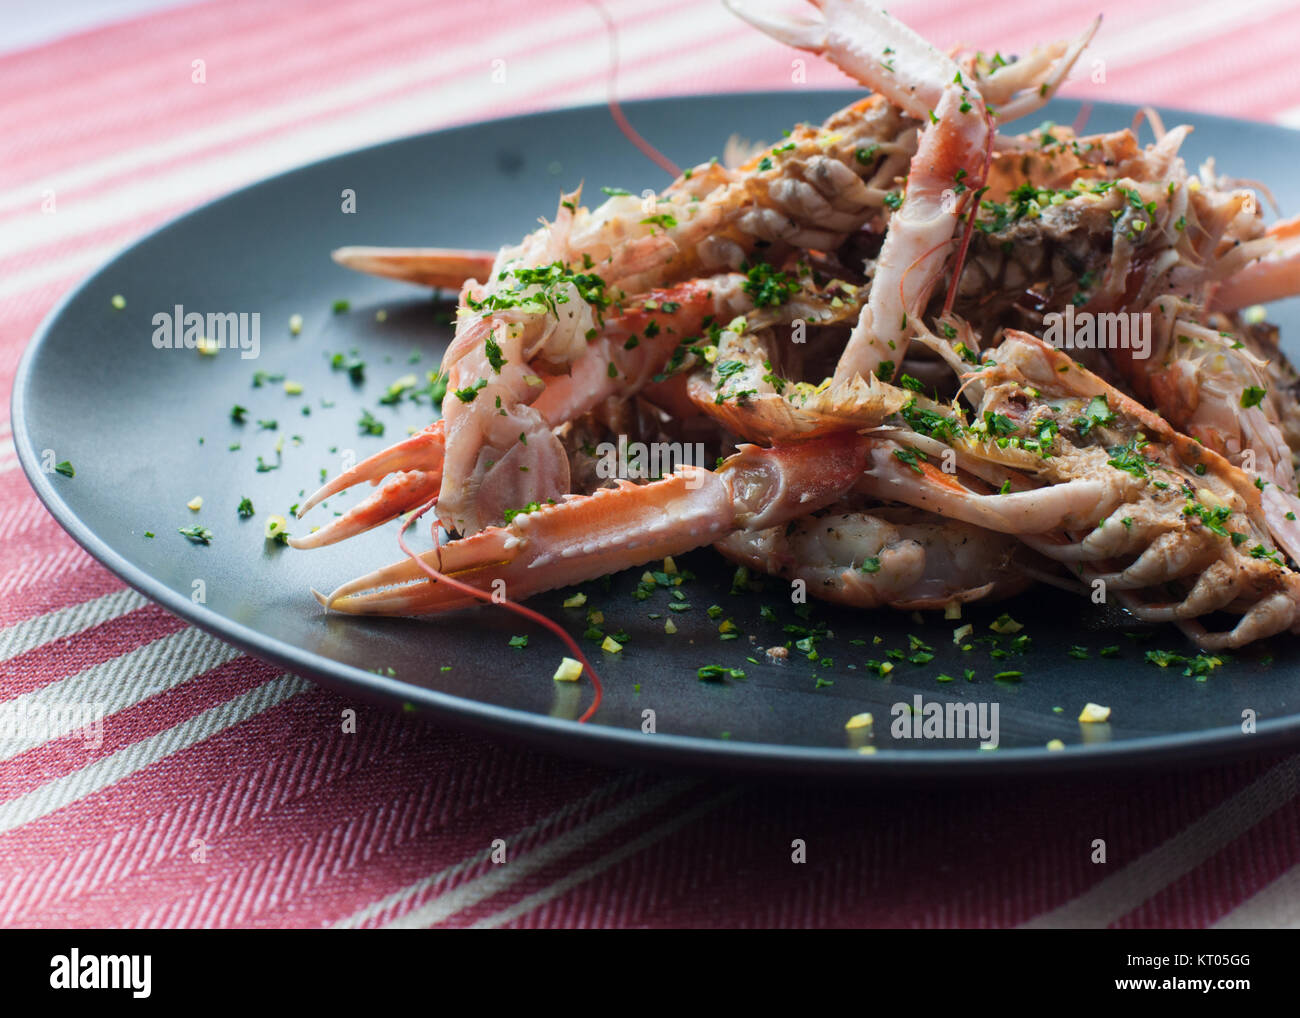 fresh cooked lobster with herbs on black plate with red and white stripe table cloth Stock Photo